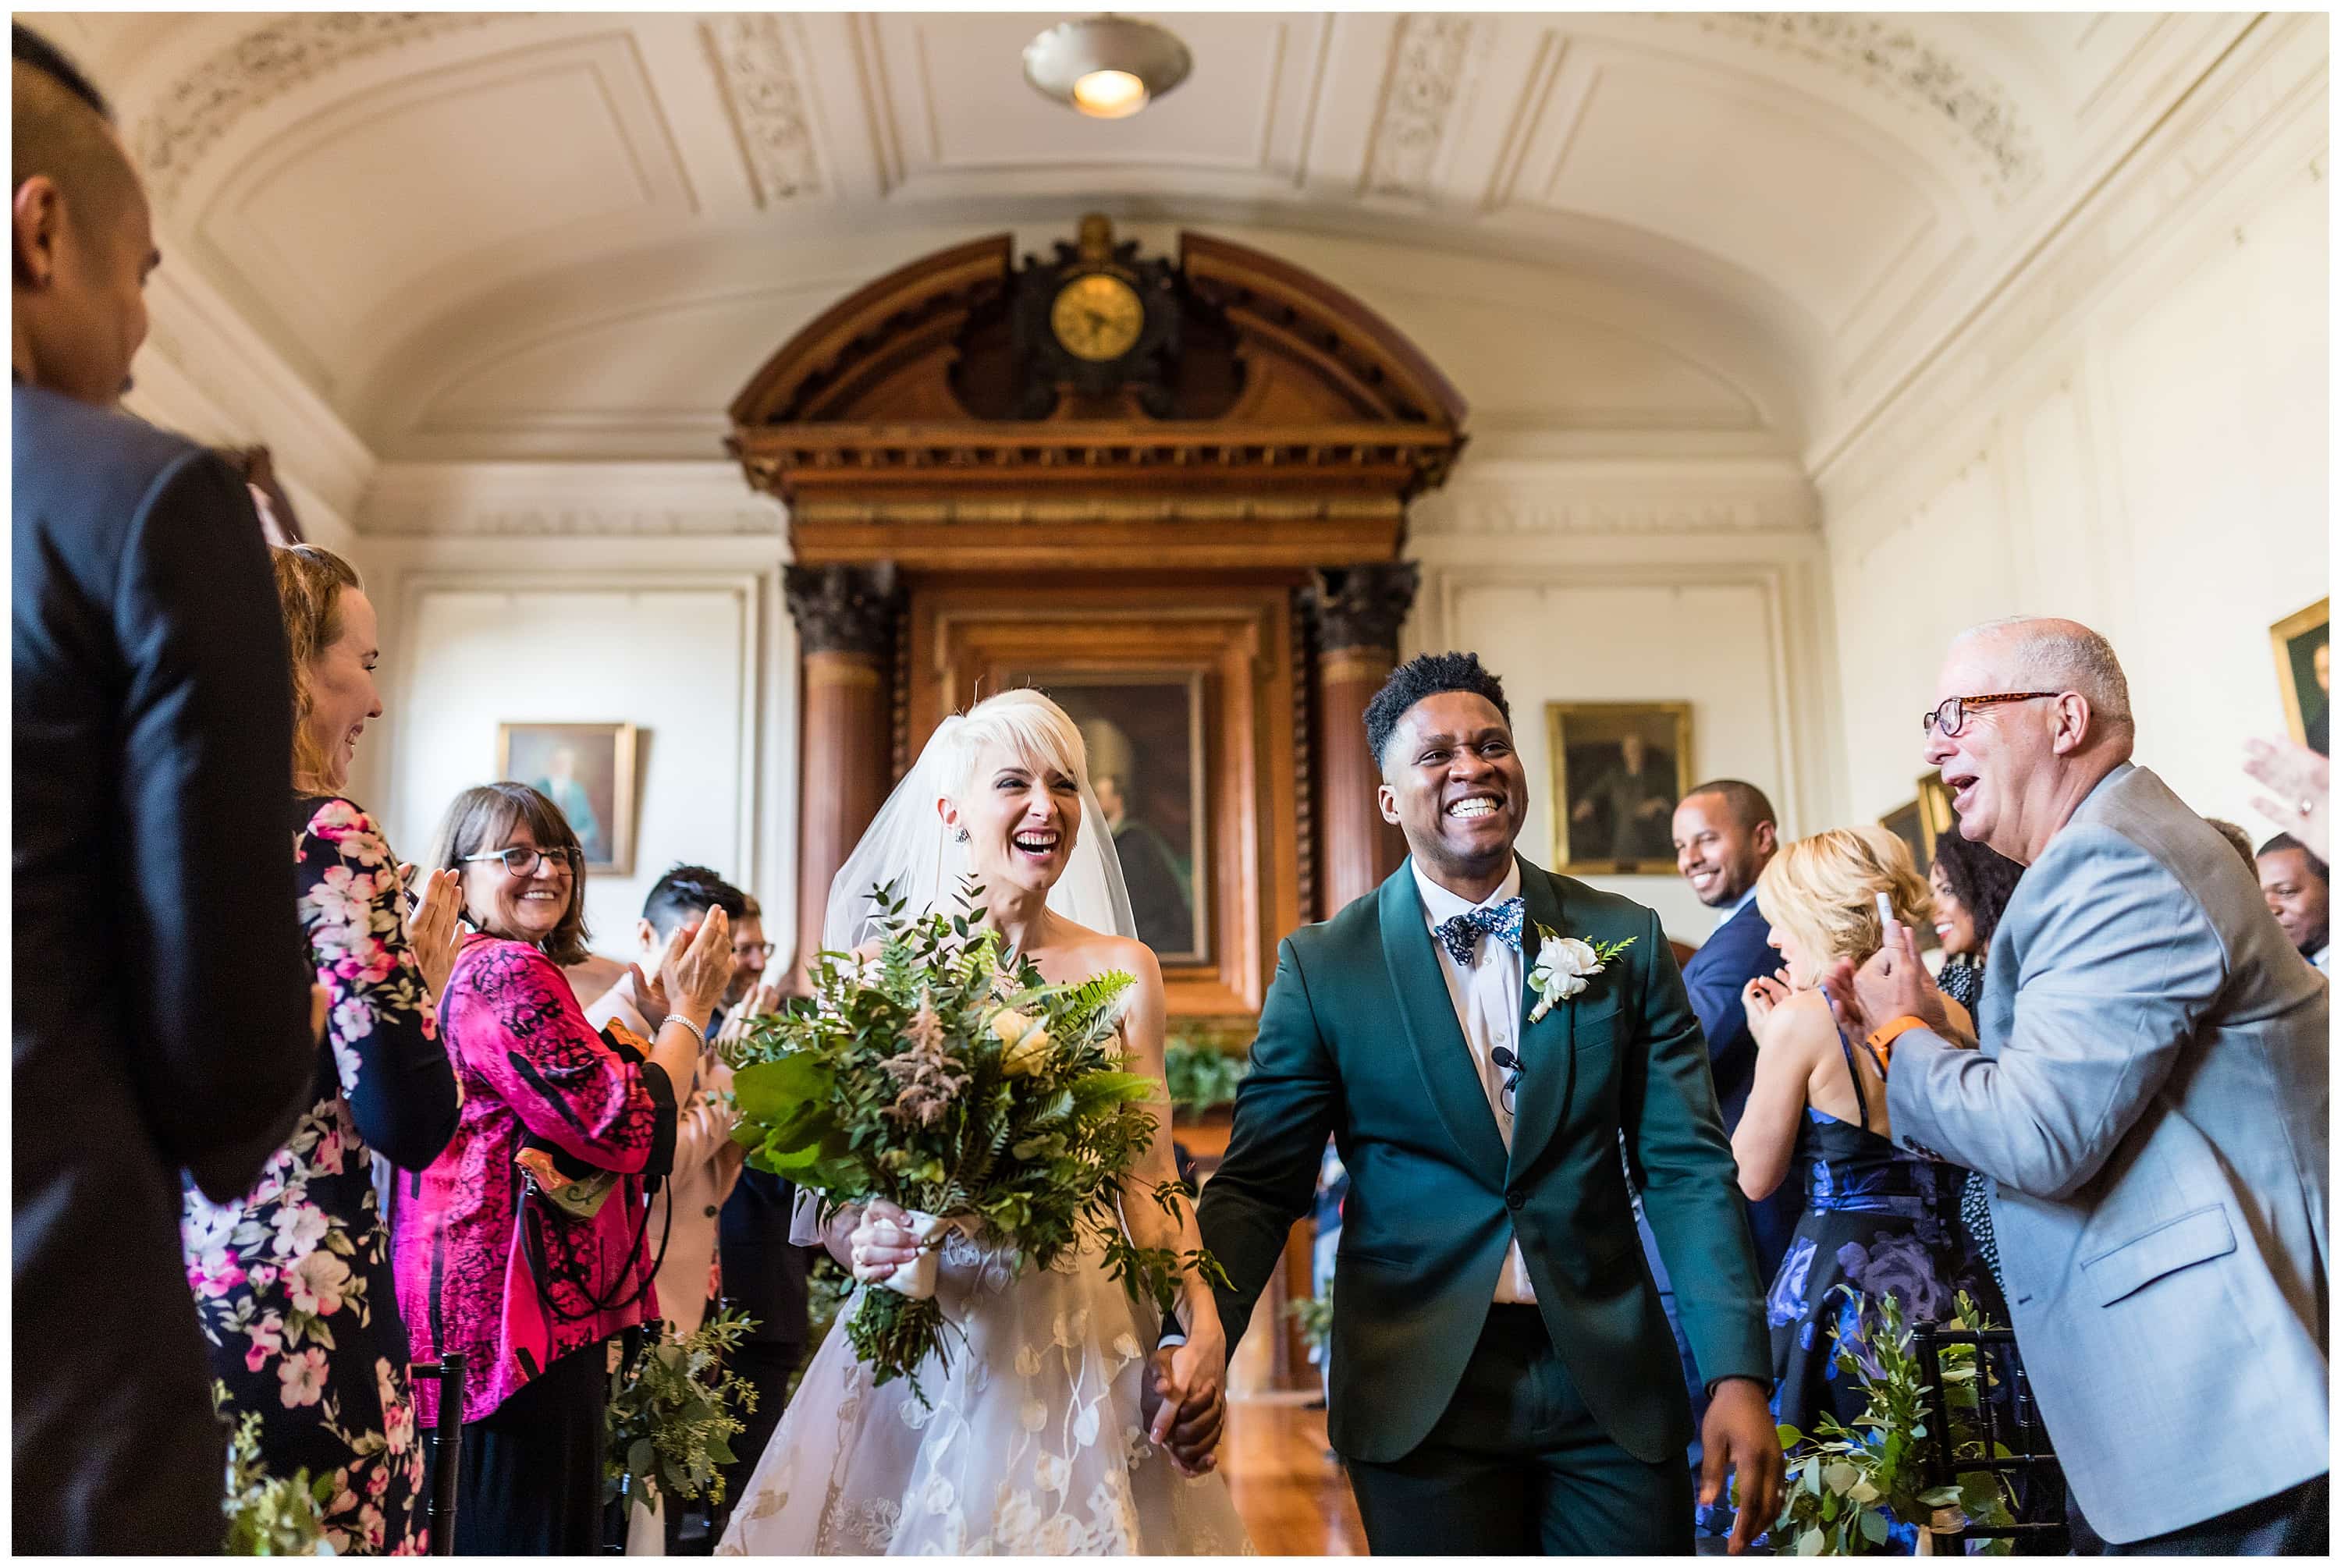 Guests cheer for bride and groom walking up the aisle after wedding ceremony